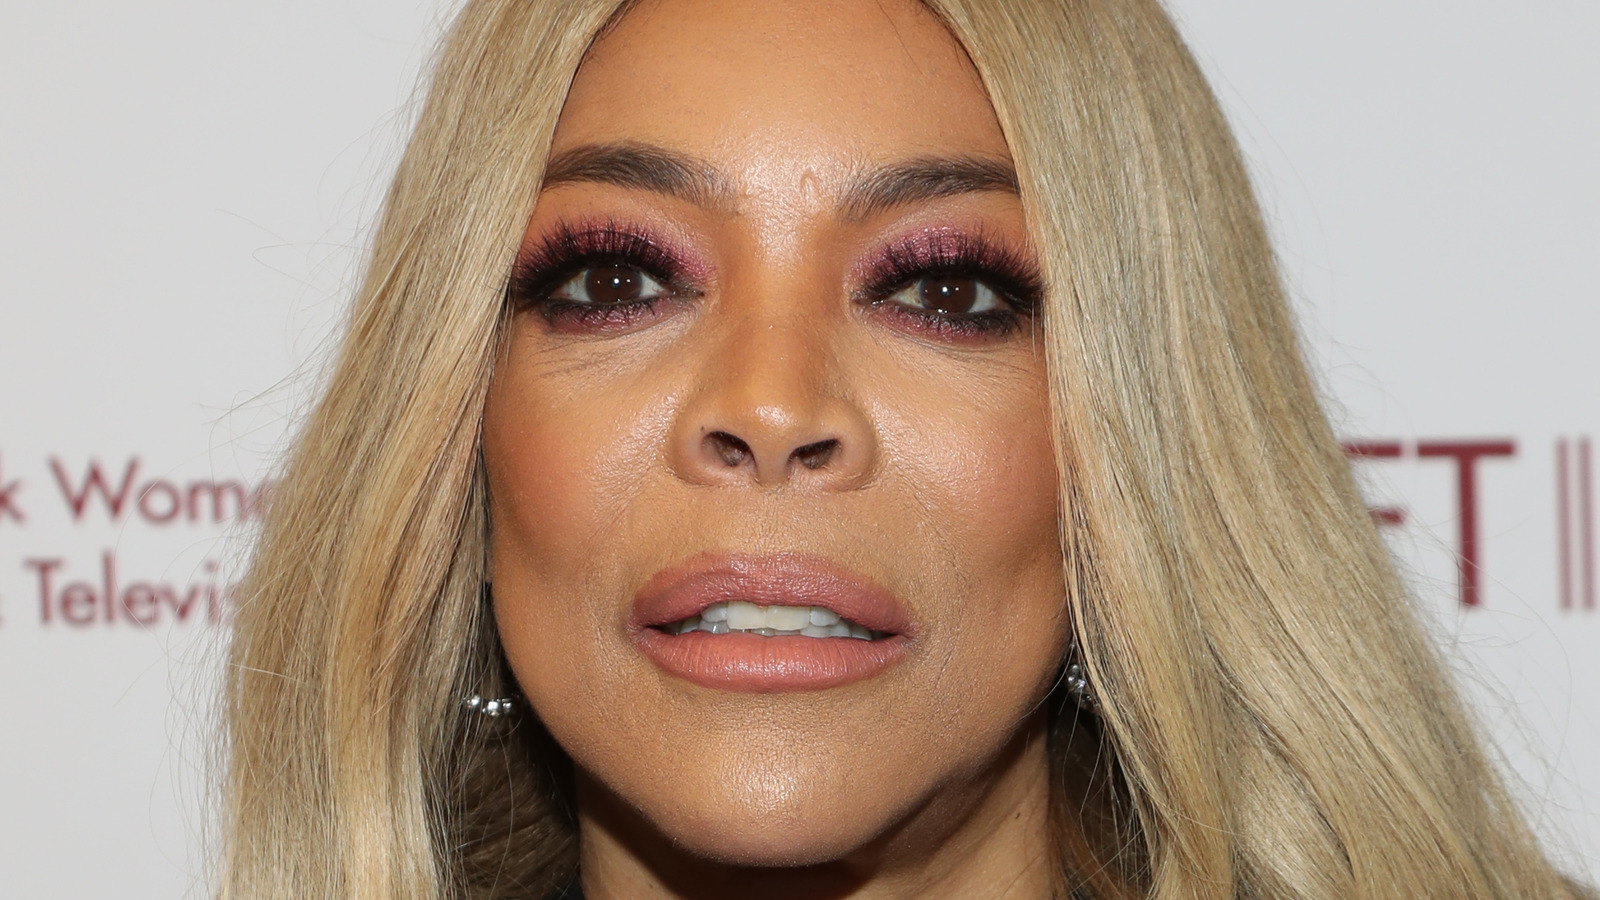 The Truth About Wendy Williams' Health Struggles